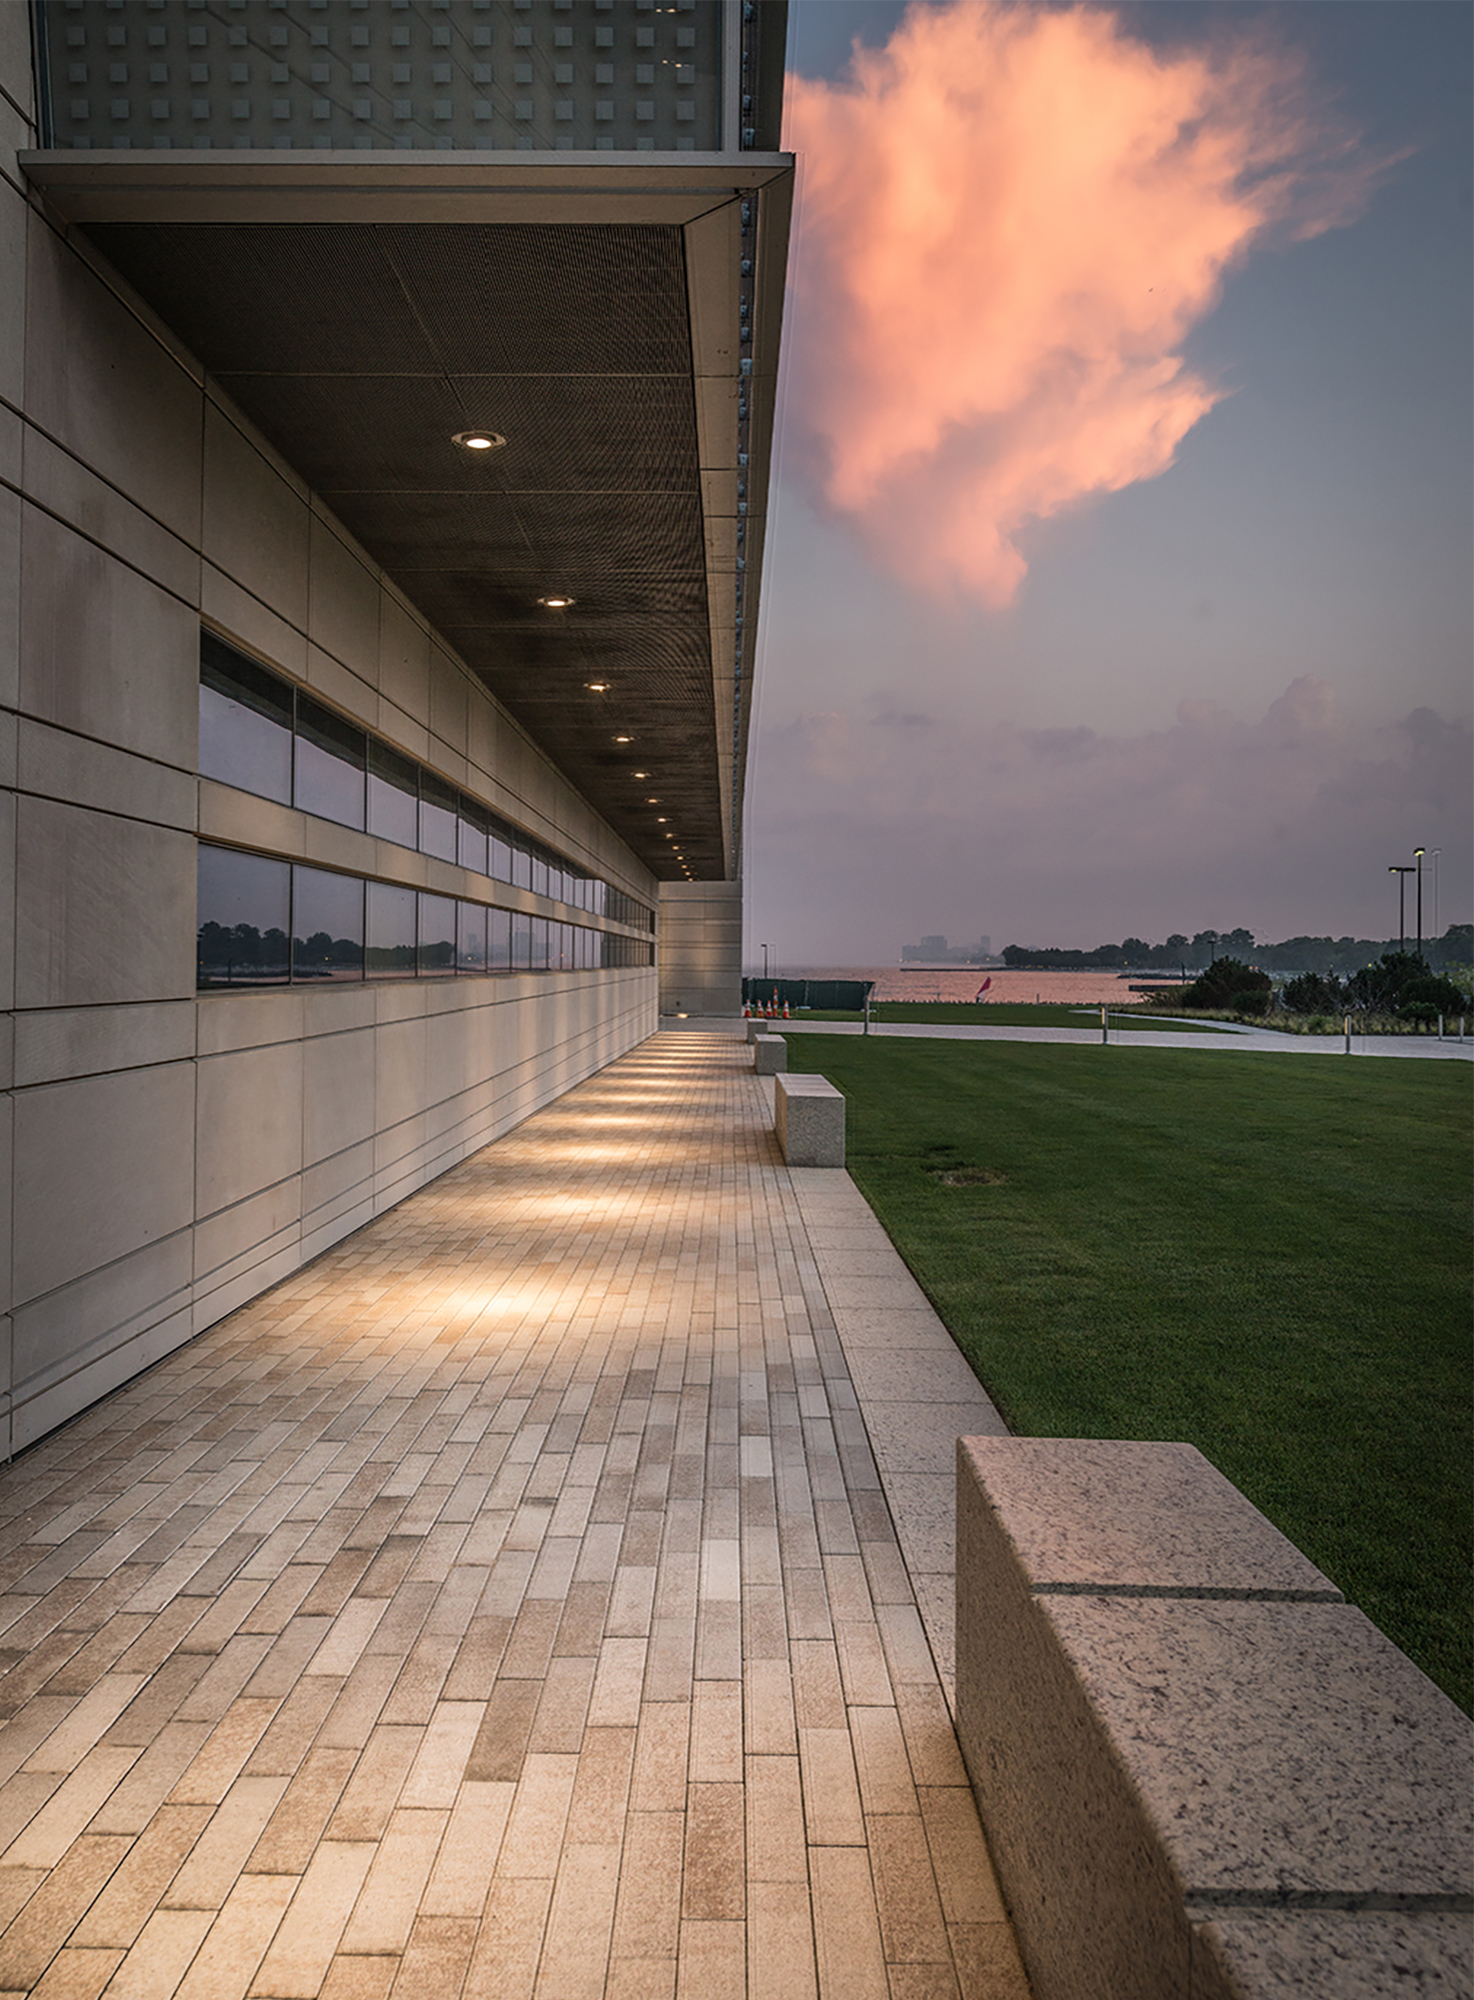 The side of a building with a path of Promenade Plank pavers in the color summer wheat, benches and grass set against the early morning sky.